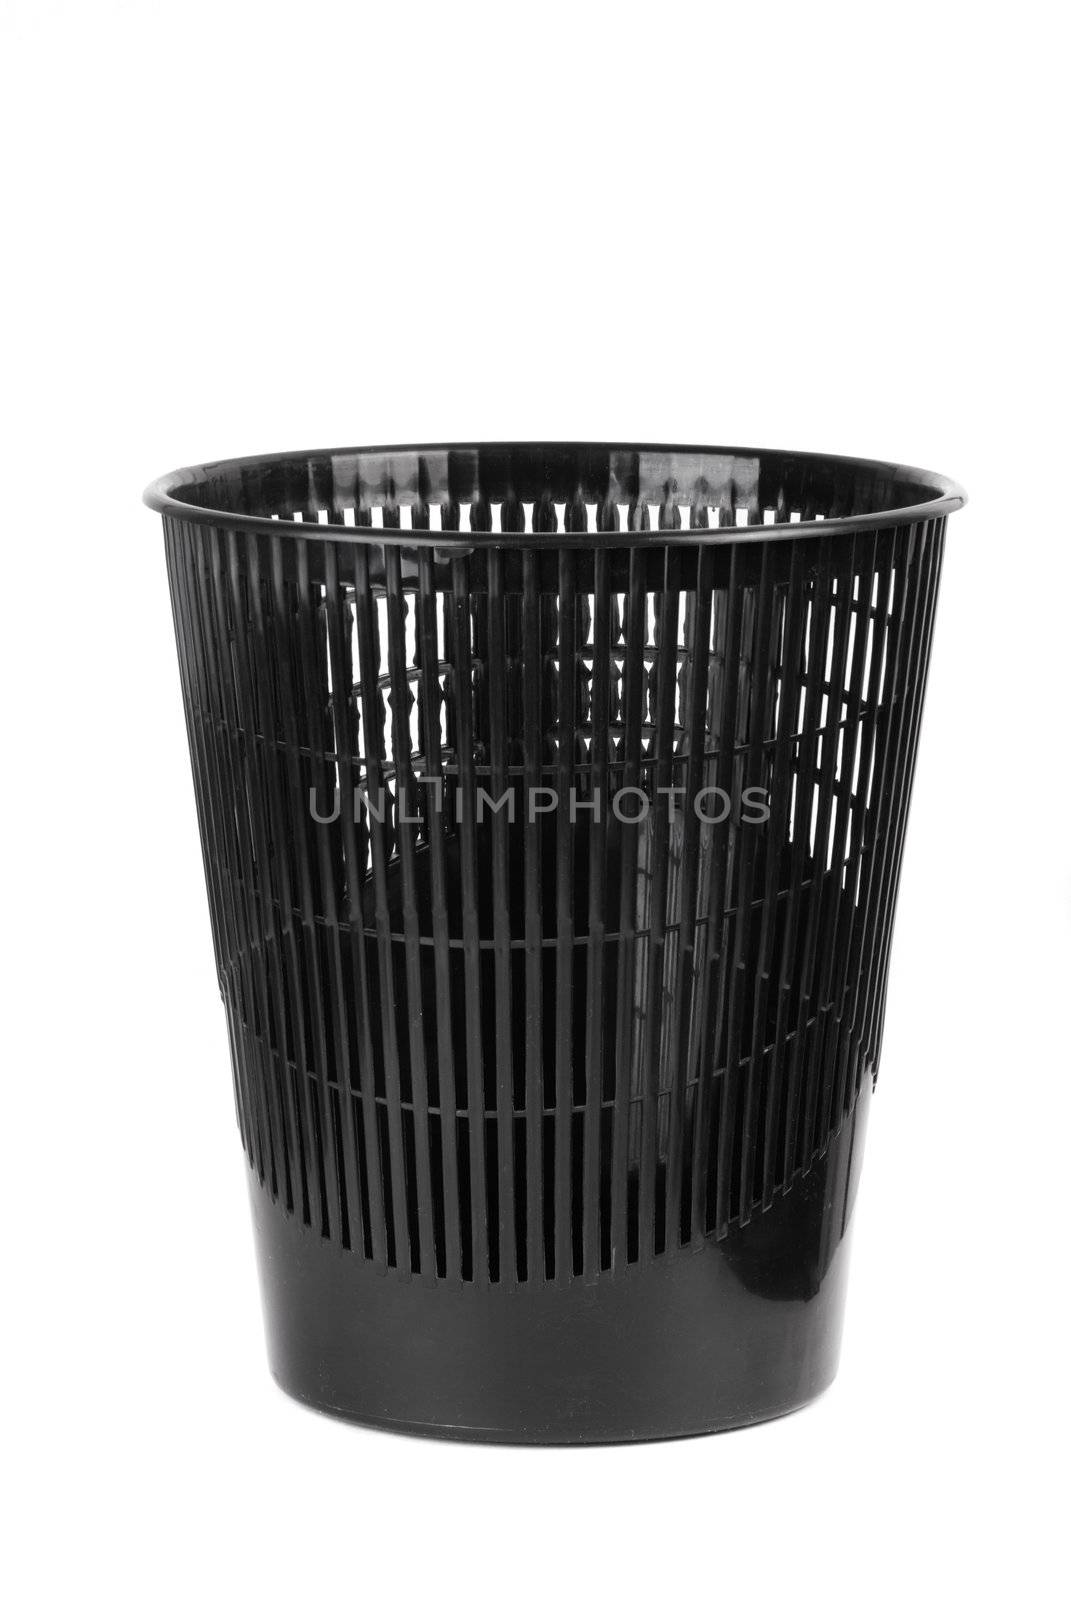 black object isolated on white background, focus point on nearest part